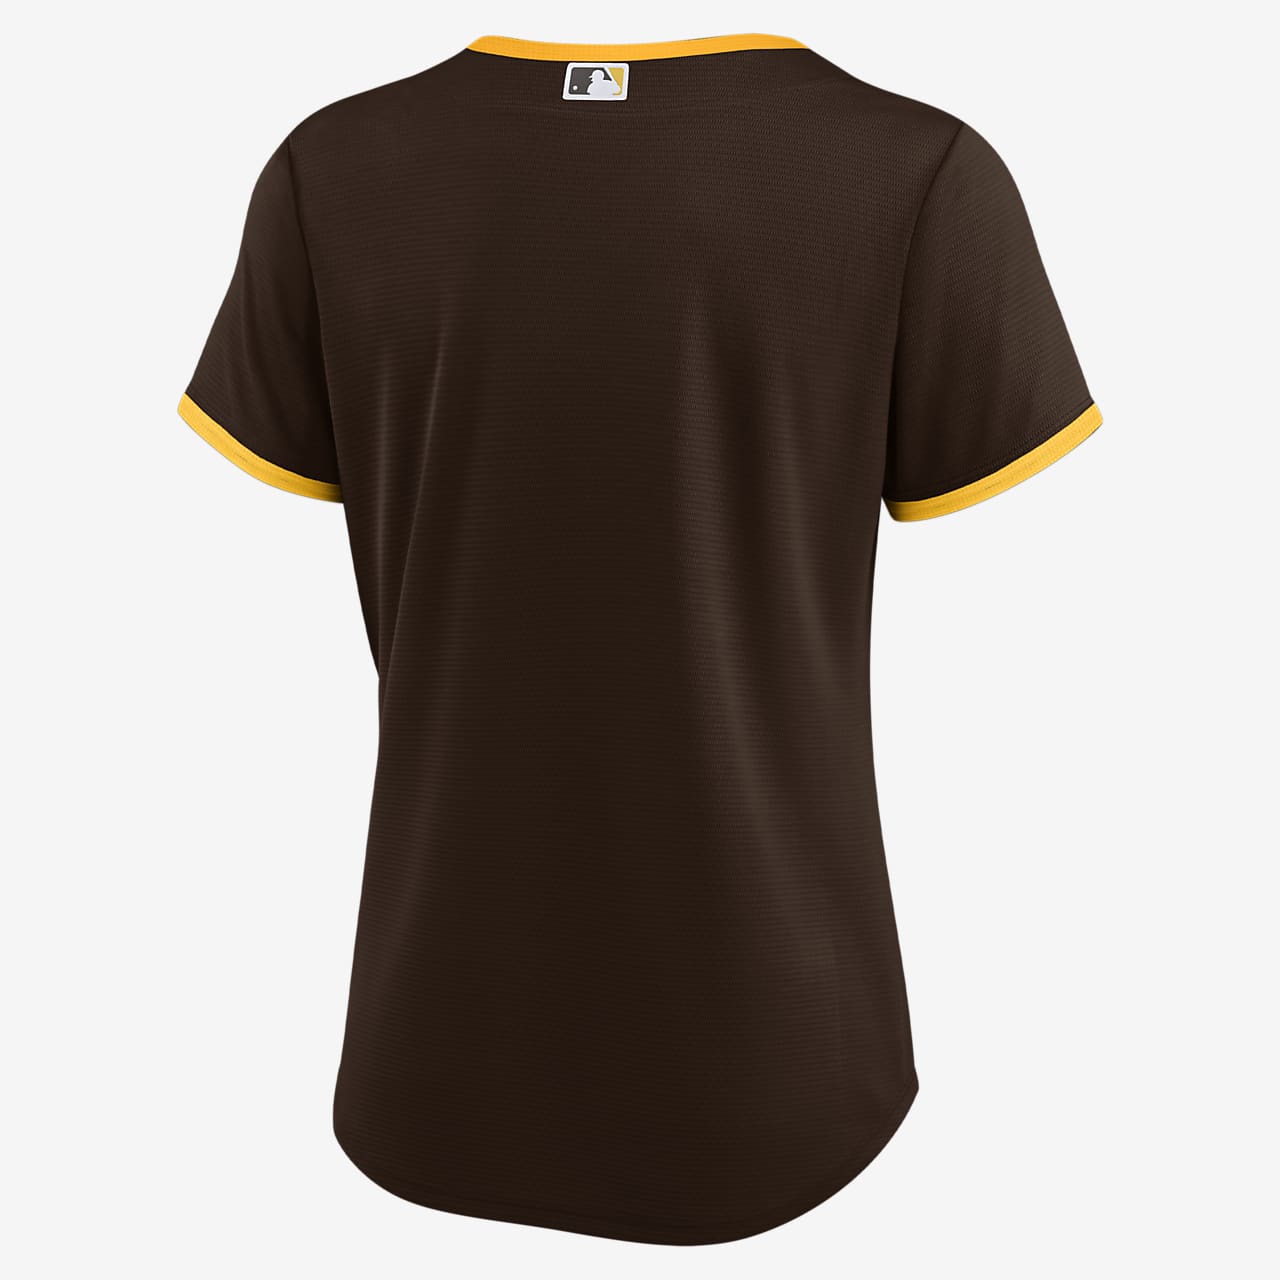  San Diego Padres Adult XL Licensed Replica Jersey Tee : Sports  & Outdoors